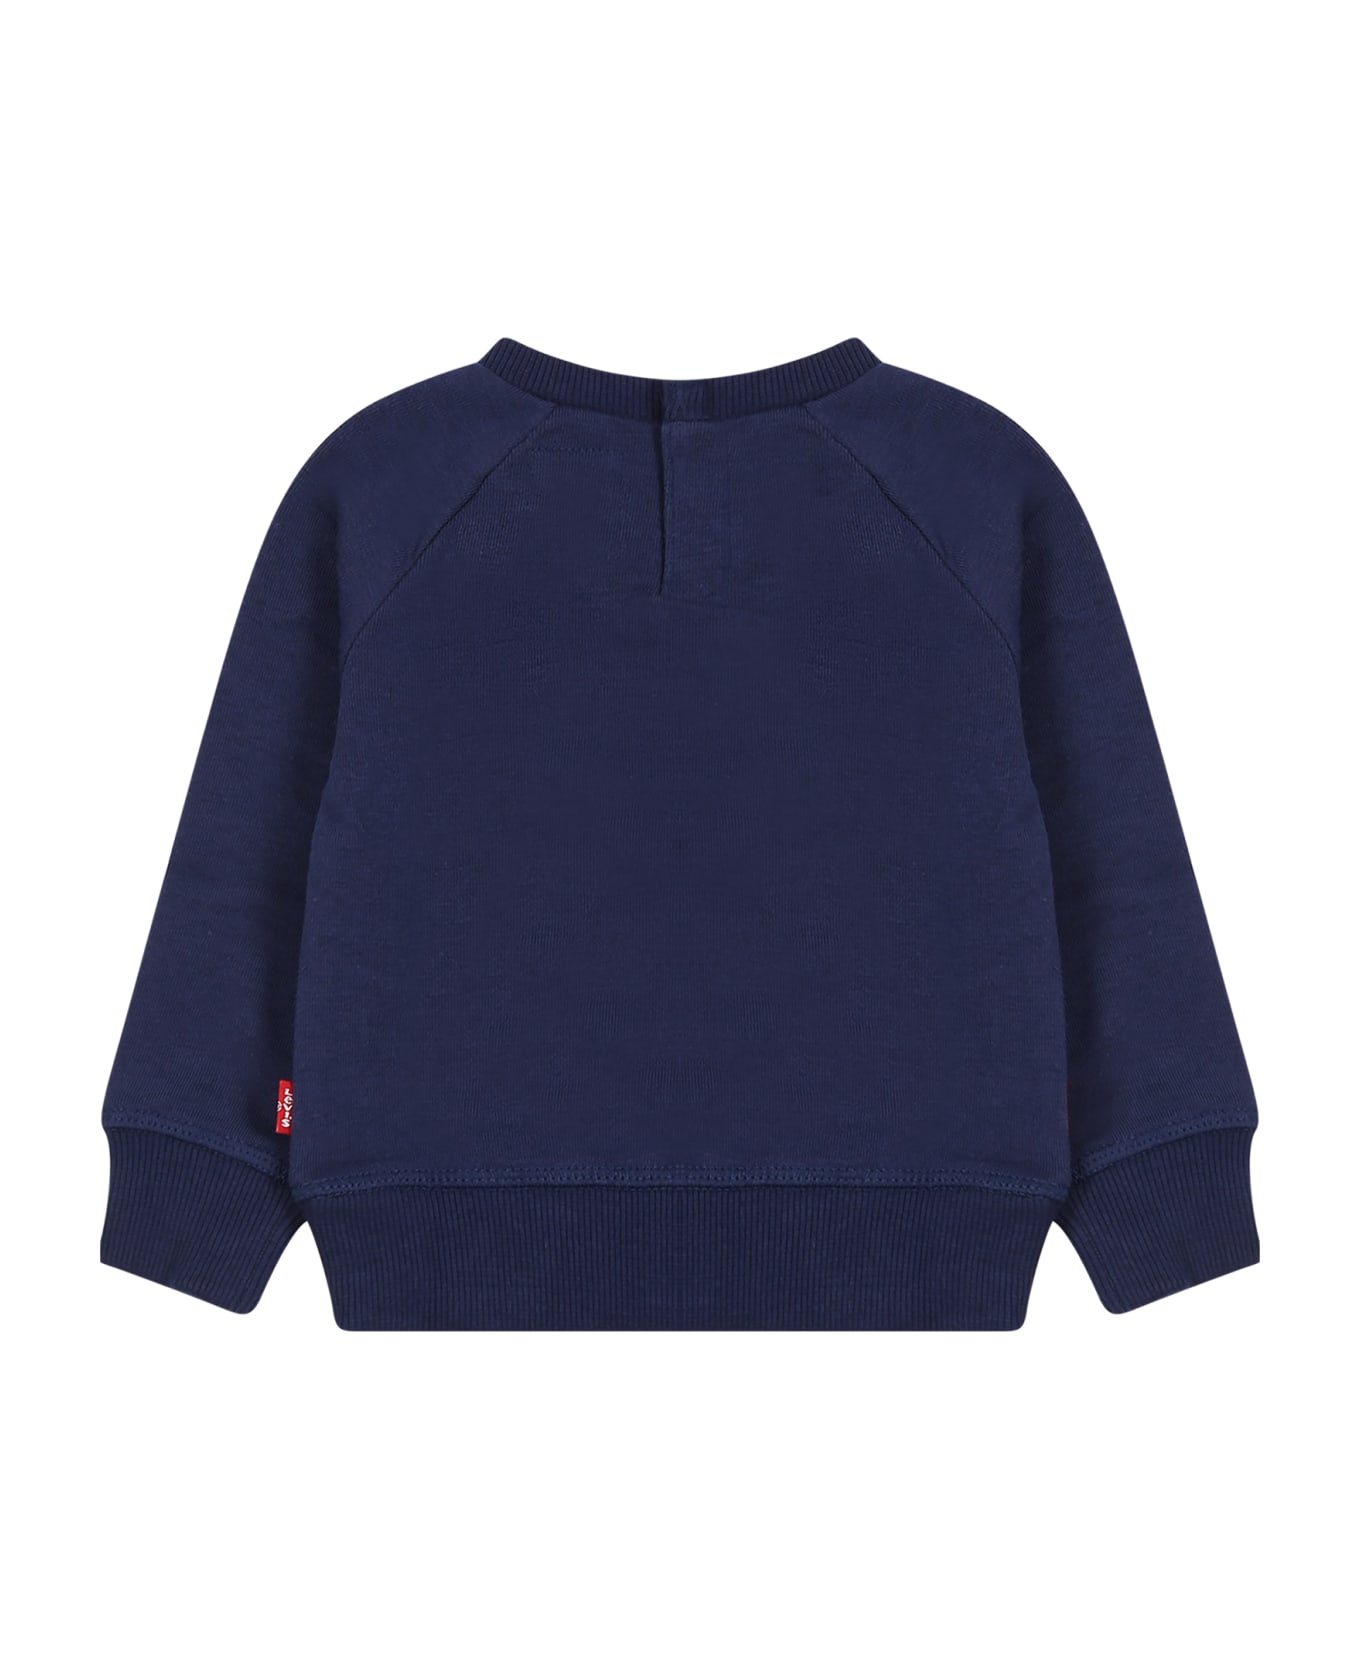 Levi's Blue Sweatshirt For Baby Girl With Logo - Blue